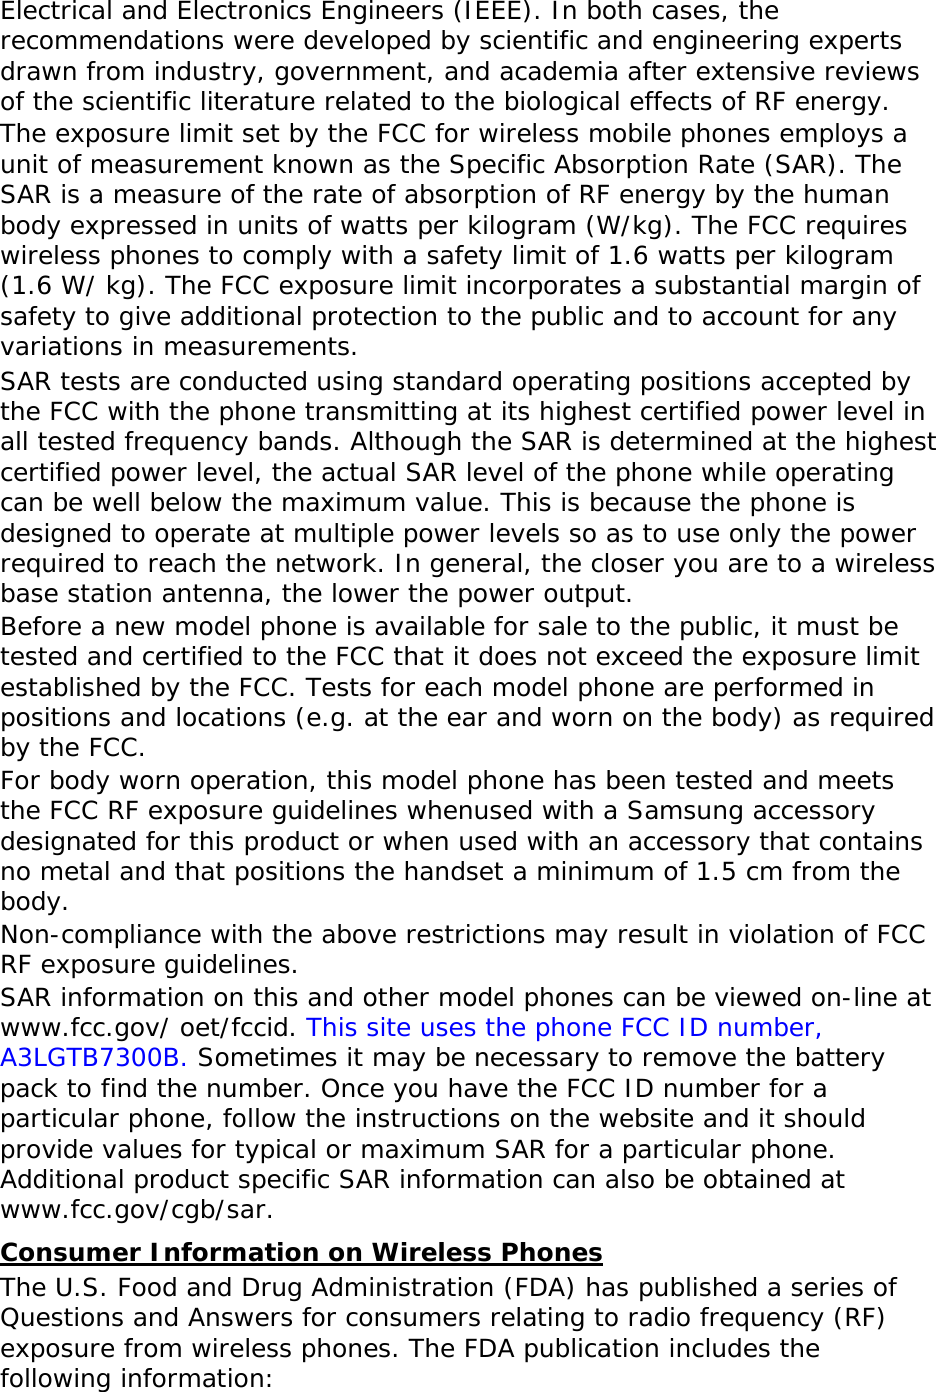 Electrical and Electronics Engineers (IEEE). In both cases, the recommendations were developed by scientific and engineering experts drawn from industry, government, and academia after extensive reviews of the scientific literature related to the biological effects of RF energy. The exposure limit set by the FCC for wireless mobile phones employs a unit of measurement known as the Specific Absorption Rate (SAR). The SAR is a measure of the rate of absorption of RF energy by the human body expressed in units of watts per kilogram (W/kg). The FCC requires wireless phones to comply with a safety limit of 1.6 watts per kilogram (1.6 W/ kg). The FCC exposure limit incorporates a substantial margin of safety to give additional protection to the public and to account for any variations in measurements. SAR tests are conducted using standard operating positions accepted by the FCC with the phone transmitting at its highest certified power level in all tested frequency bands. Although the SAR is determined at the highest certified power level, the actual SAR level of the phone while operating can be well below the maximum value. This is because the phone is designed to operate at multiple power levels so as to use only the power required to reach the network. In general, the closer you are to a wireless base station antenna, the lower the power output. Before a new model phone is available for sale to the public, it must be tested and certified to the FCC that it does not exceed the exposure limit established by the FCC. Tests for each model phone are performed in positions and locations (e.g. at the ear and worn on the body) as required by the FCC.   For body worn operation, this model phone has been tested and meets the FCC RF exposure guidelines whenused with a Samsung accessory designated for this product or when used with an accessory that contains no metal and that positions the handset a minimum of 1.5 cm from the body.  Non-compliance with the above restrictions may result in violation of FCC RF exposure guidelines. SAR information on this and other model phones can be viewed on-line at www.fcc.gov/ oet/fccid. This site uses the phone FCC ID number, A3LGTB7300B. Sometimes it may be necessary to remove the battery pack to find the number. Once you have the FCC ID number for a particular phone, follow the instructions on the website and it should provide values for typical or maximum SAR for a particular phone. Additional product specific SAR information can also be obtained at www.fcc.gov/cgb/sar. Consumer Information on Wireless Phones The U.S. Food and Drug Administration (FDA) has published a series of Questions and Answers for consumers relating to radio frequency (RF) exposure from wireless phones. The FDA publication includes the following information: 